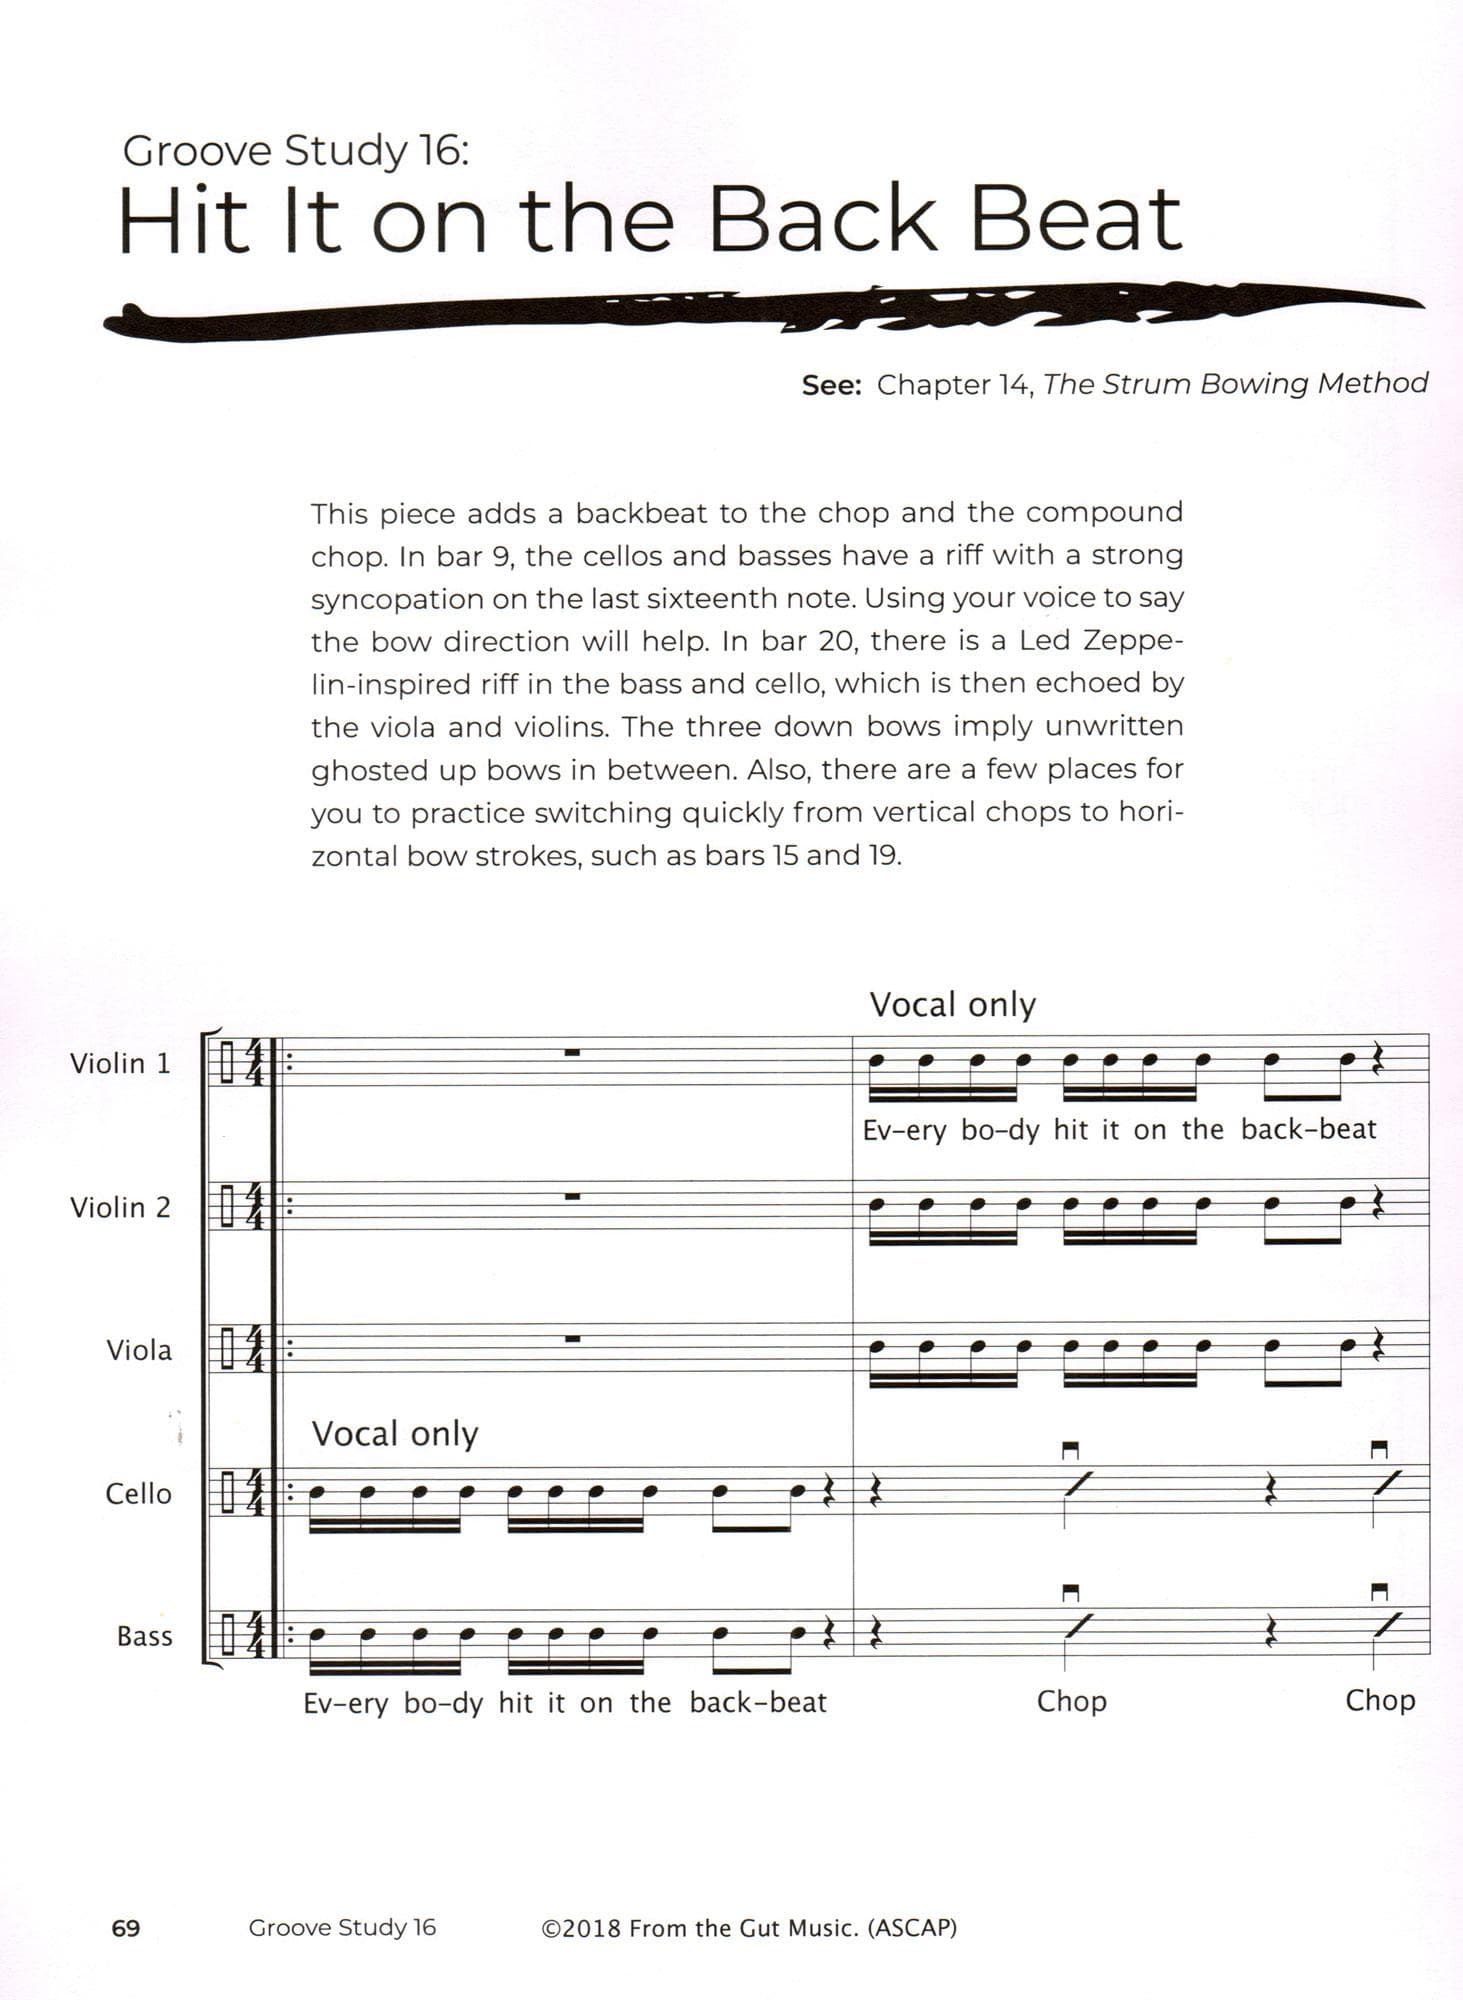 22 Groove Studies for Strings by Tracy Silverman, Companion to The Strum Bowing Method